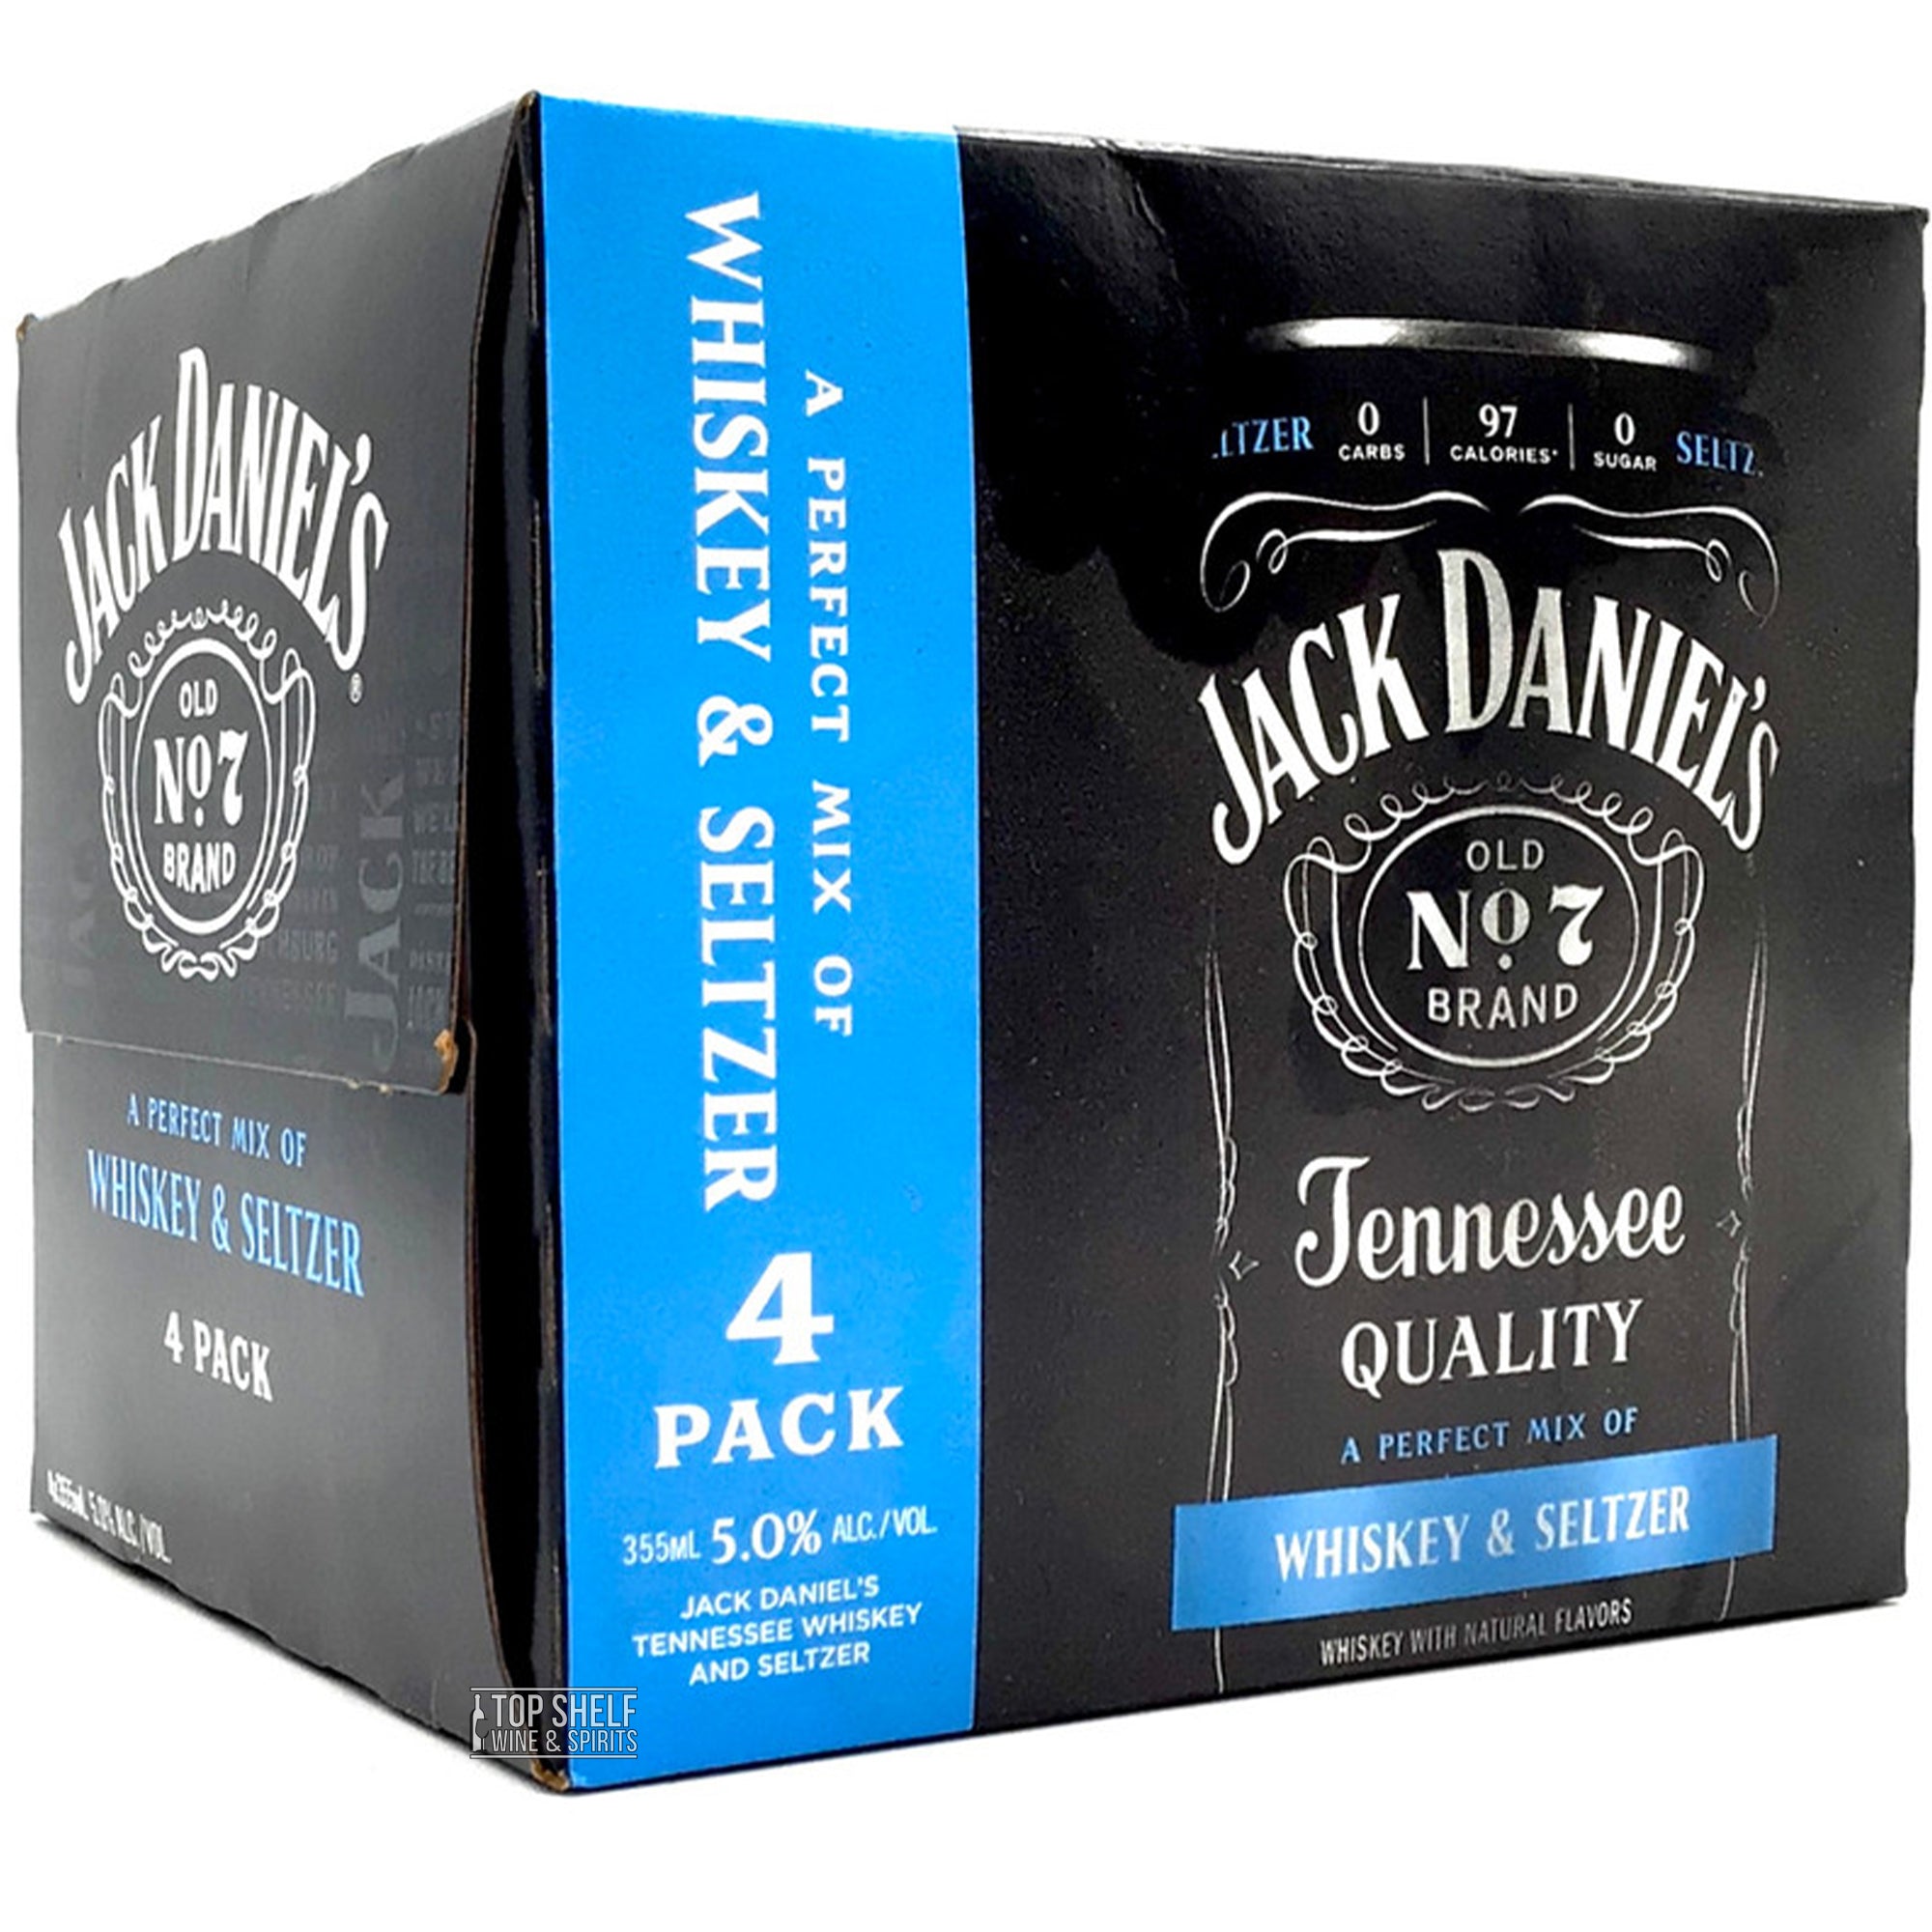 Jack Daniel's Whiskey & Seltzer (4 Pack Cans)